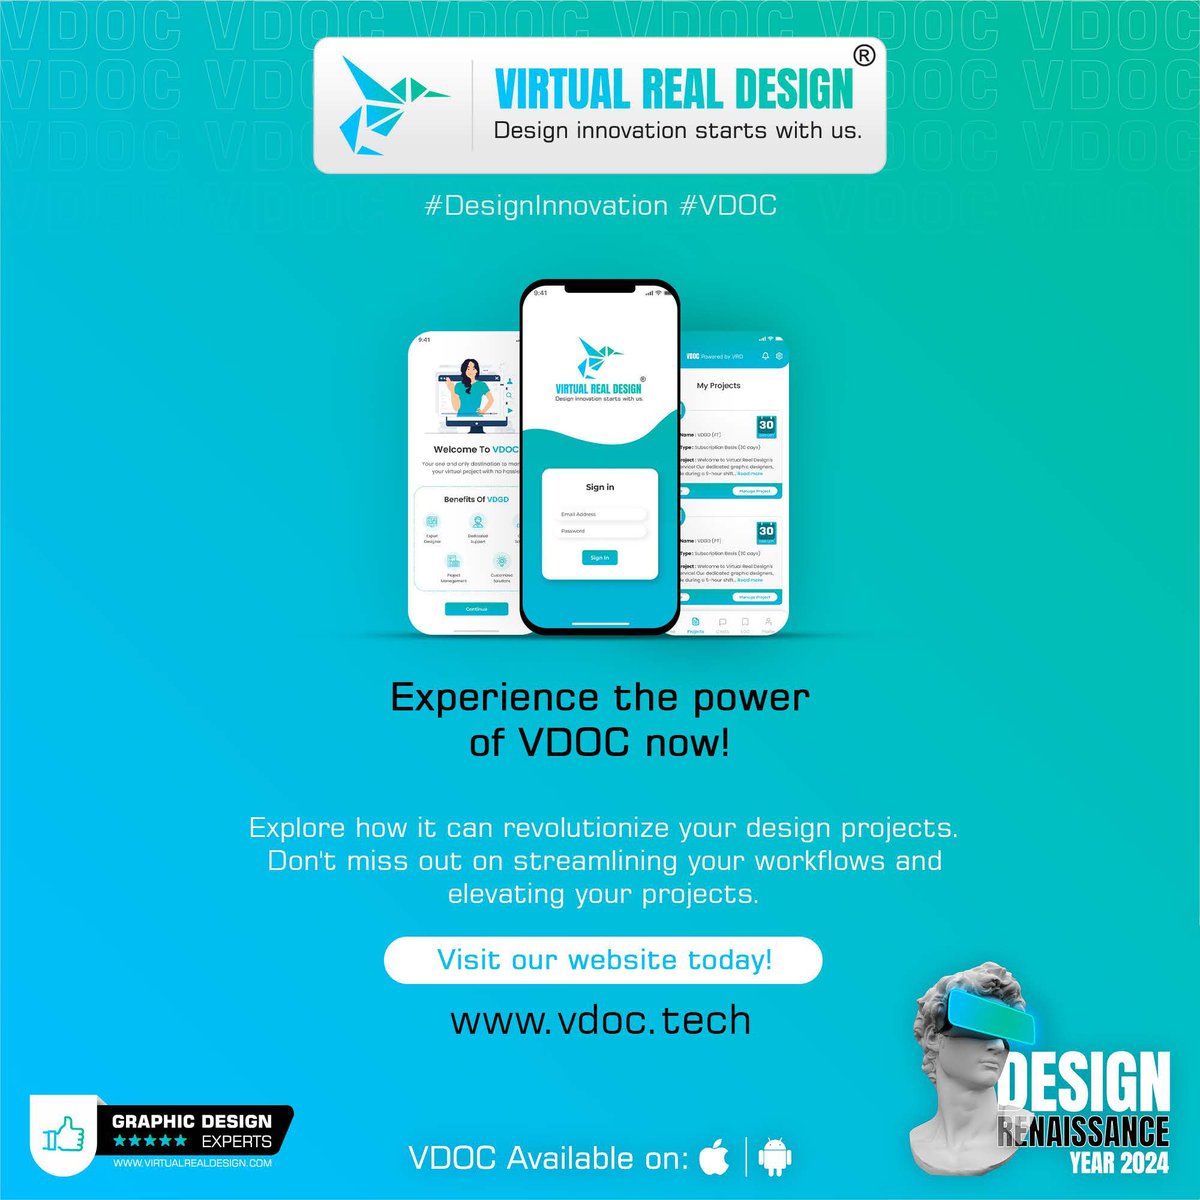 Transform your Graphic design game with VDOC! From real-time chat to organized briefcases, we've got you covered. Stay on track, stay connected, and succeed together. 💼🚀
#VirtualRealDesign #VDGD #VRDRooms #DesignRenaissanceYear2024 #ProjectManagement #TeamCollaboration